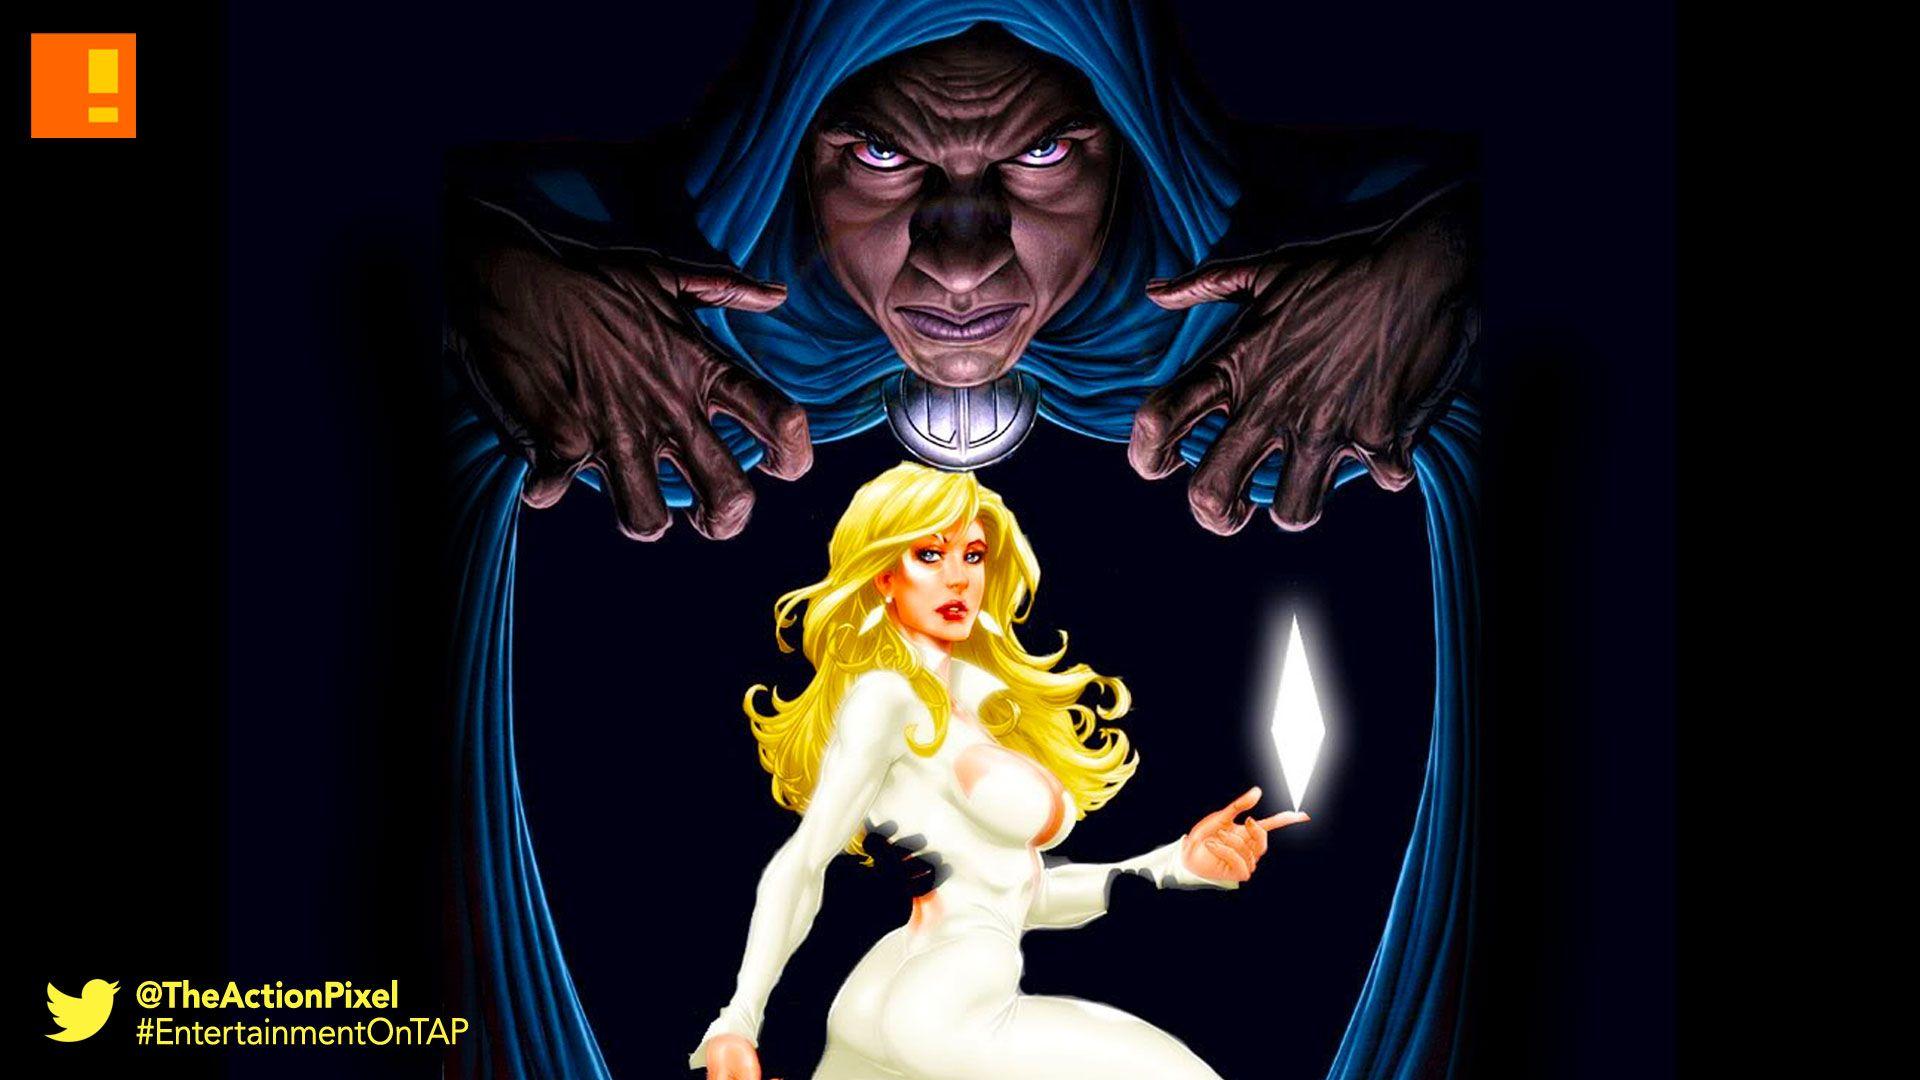 Marvel + ABC's “Cloak And Dagger” series debuts late 2018